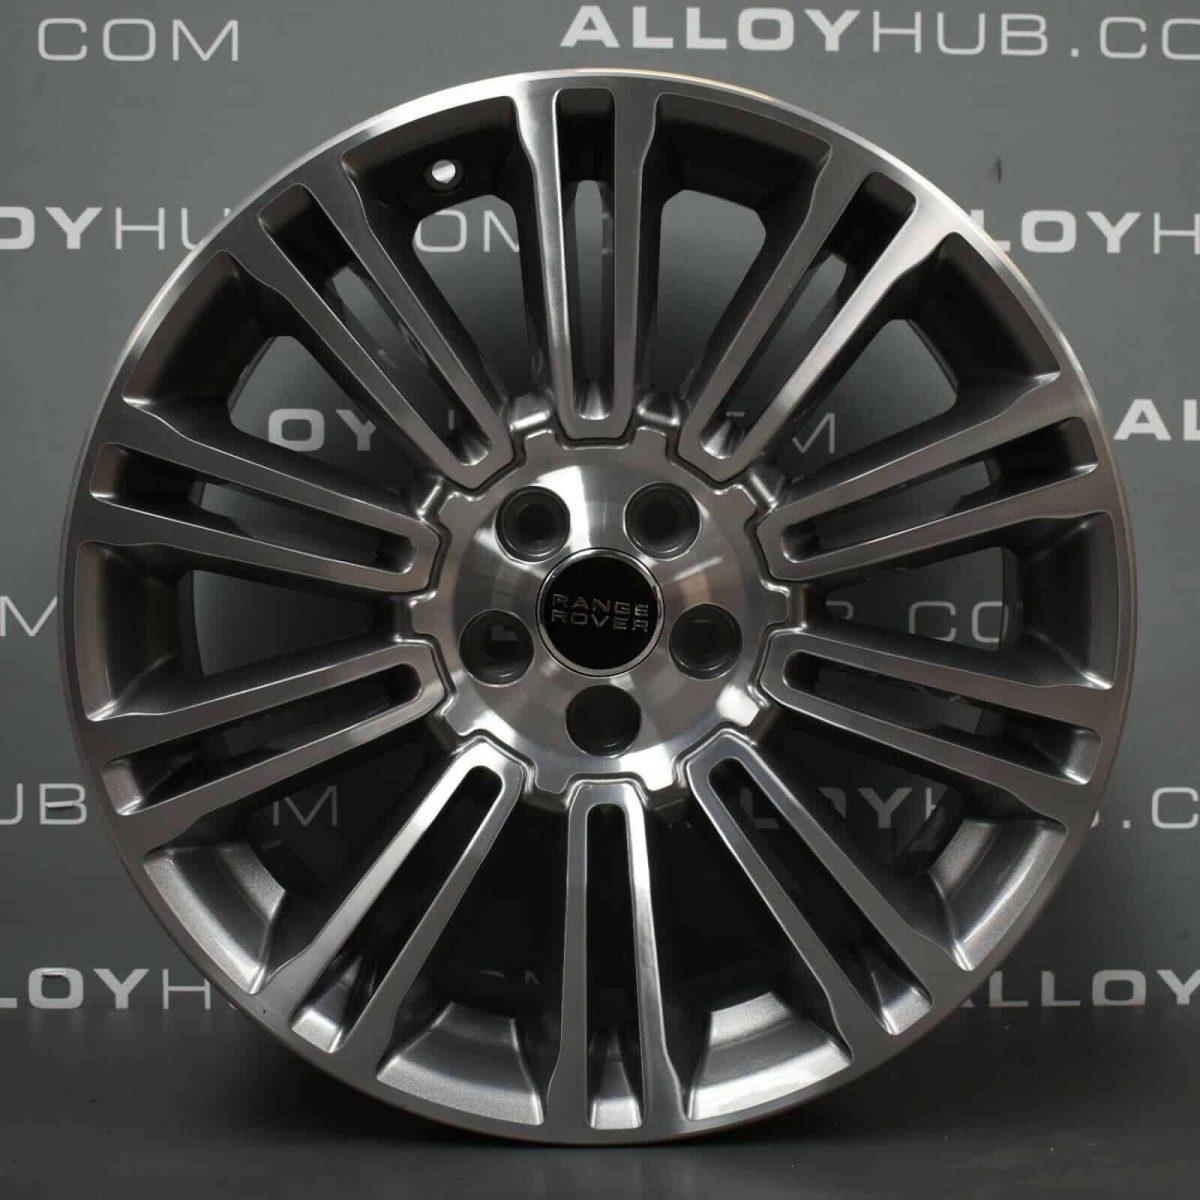 Genuine Land Rover Range Rover Evoque L538 19" inch Style 1002 Alloy Wheels with Grey & Diamond Turned Finish LR048428